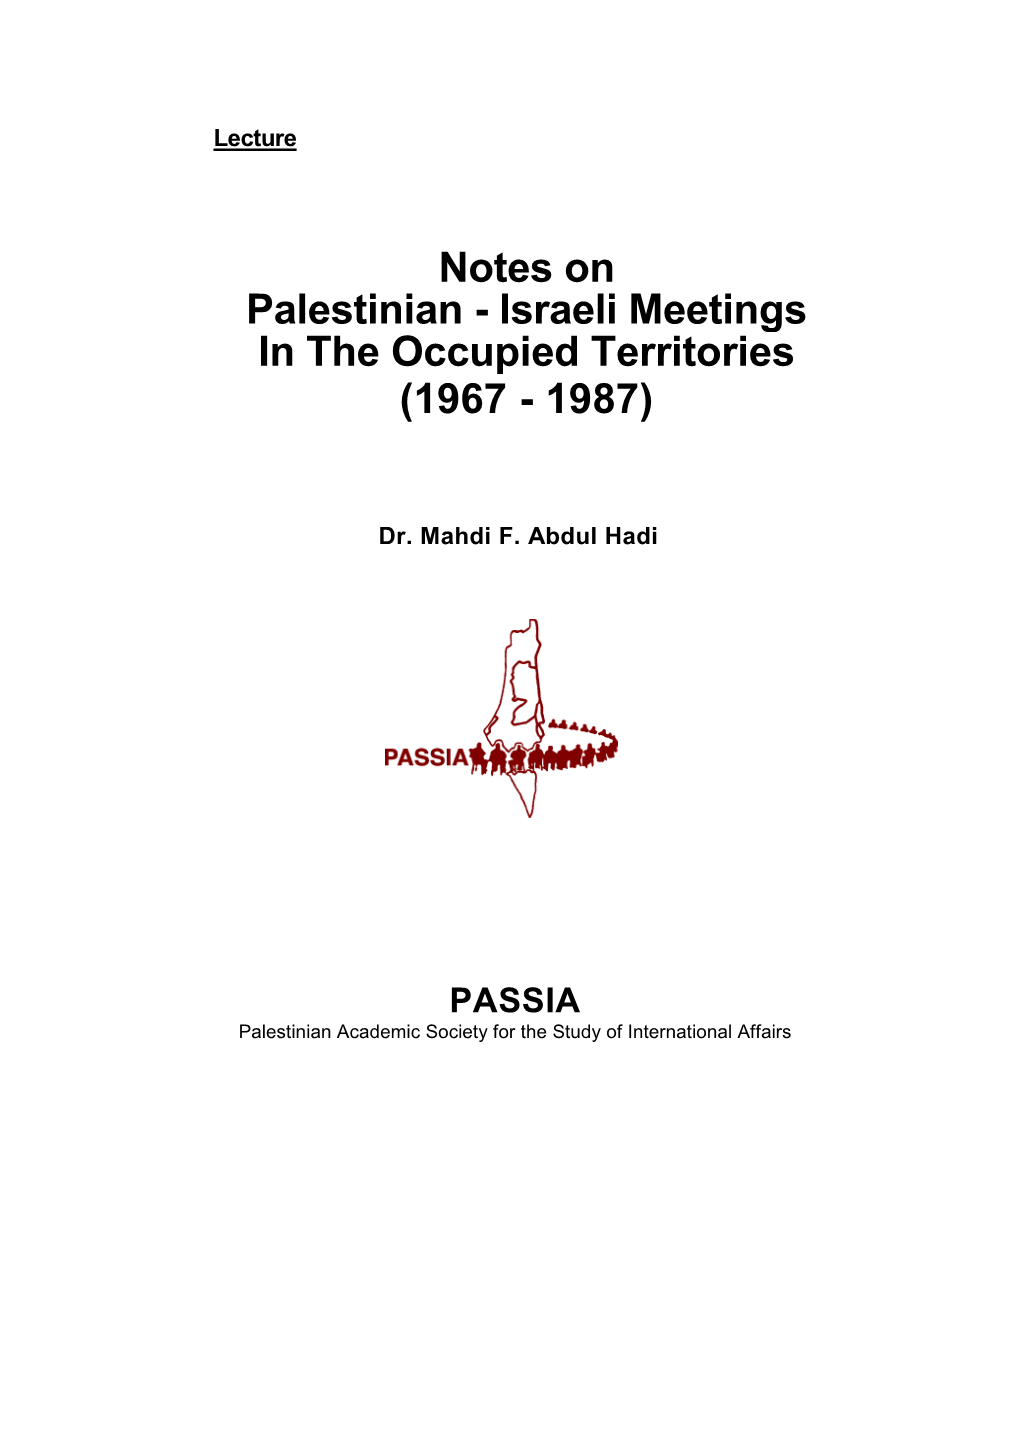 Notes on Palestinian - Israeli Meetings in the Occupied Territories